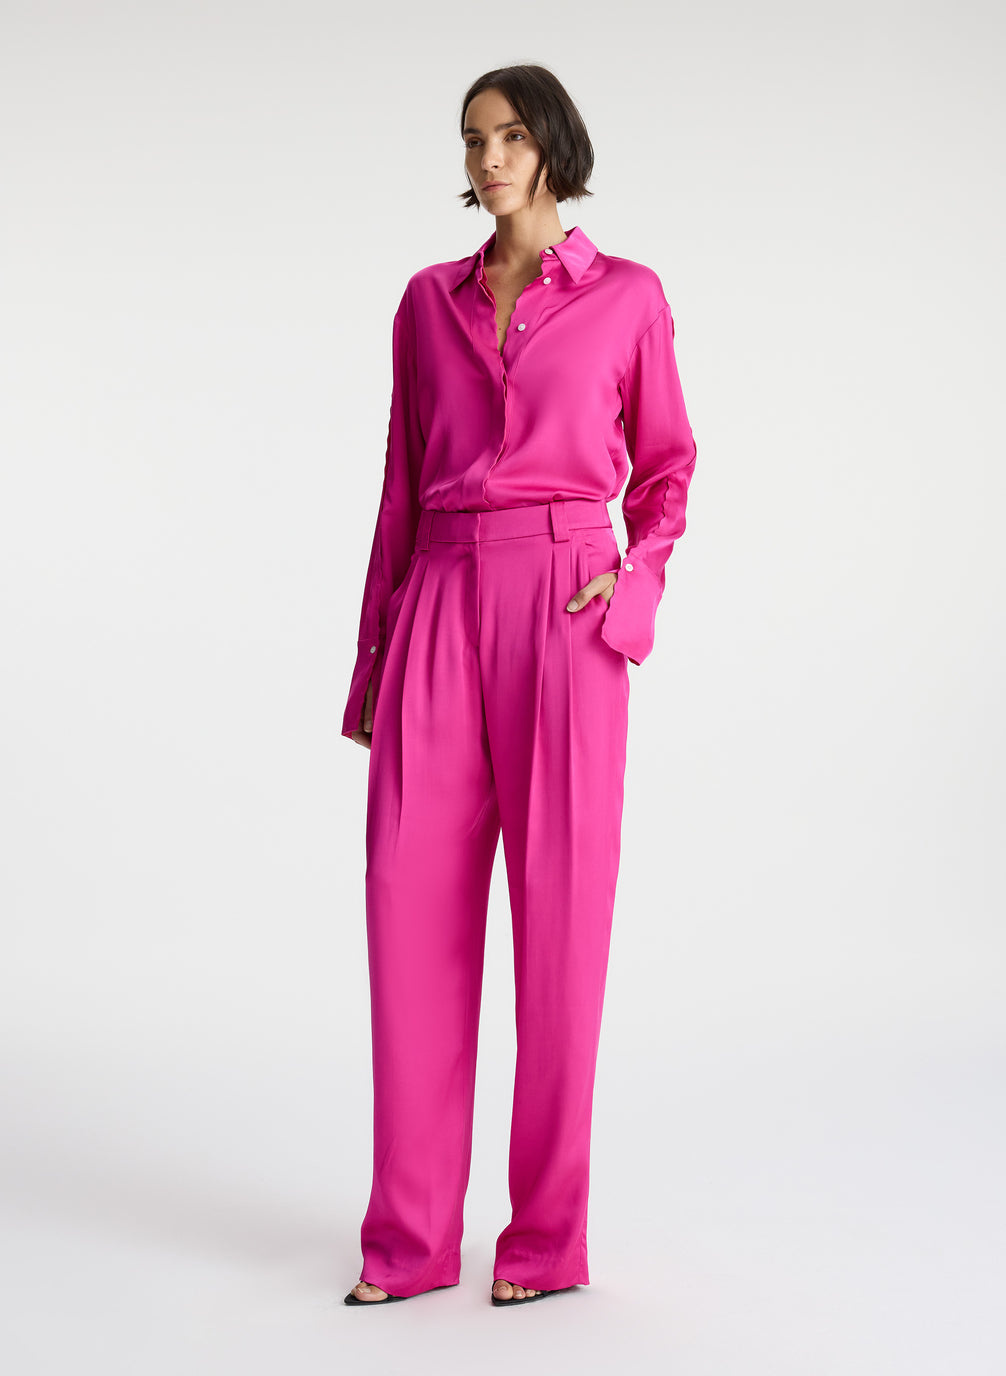 side view of woman wearing pink button down collared satin long sleeve shirt with matching pink satin pants